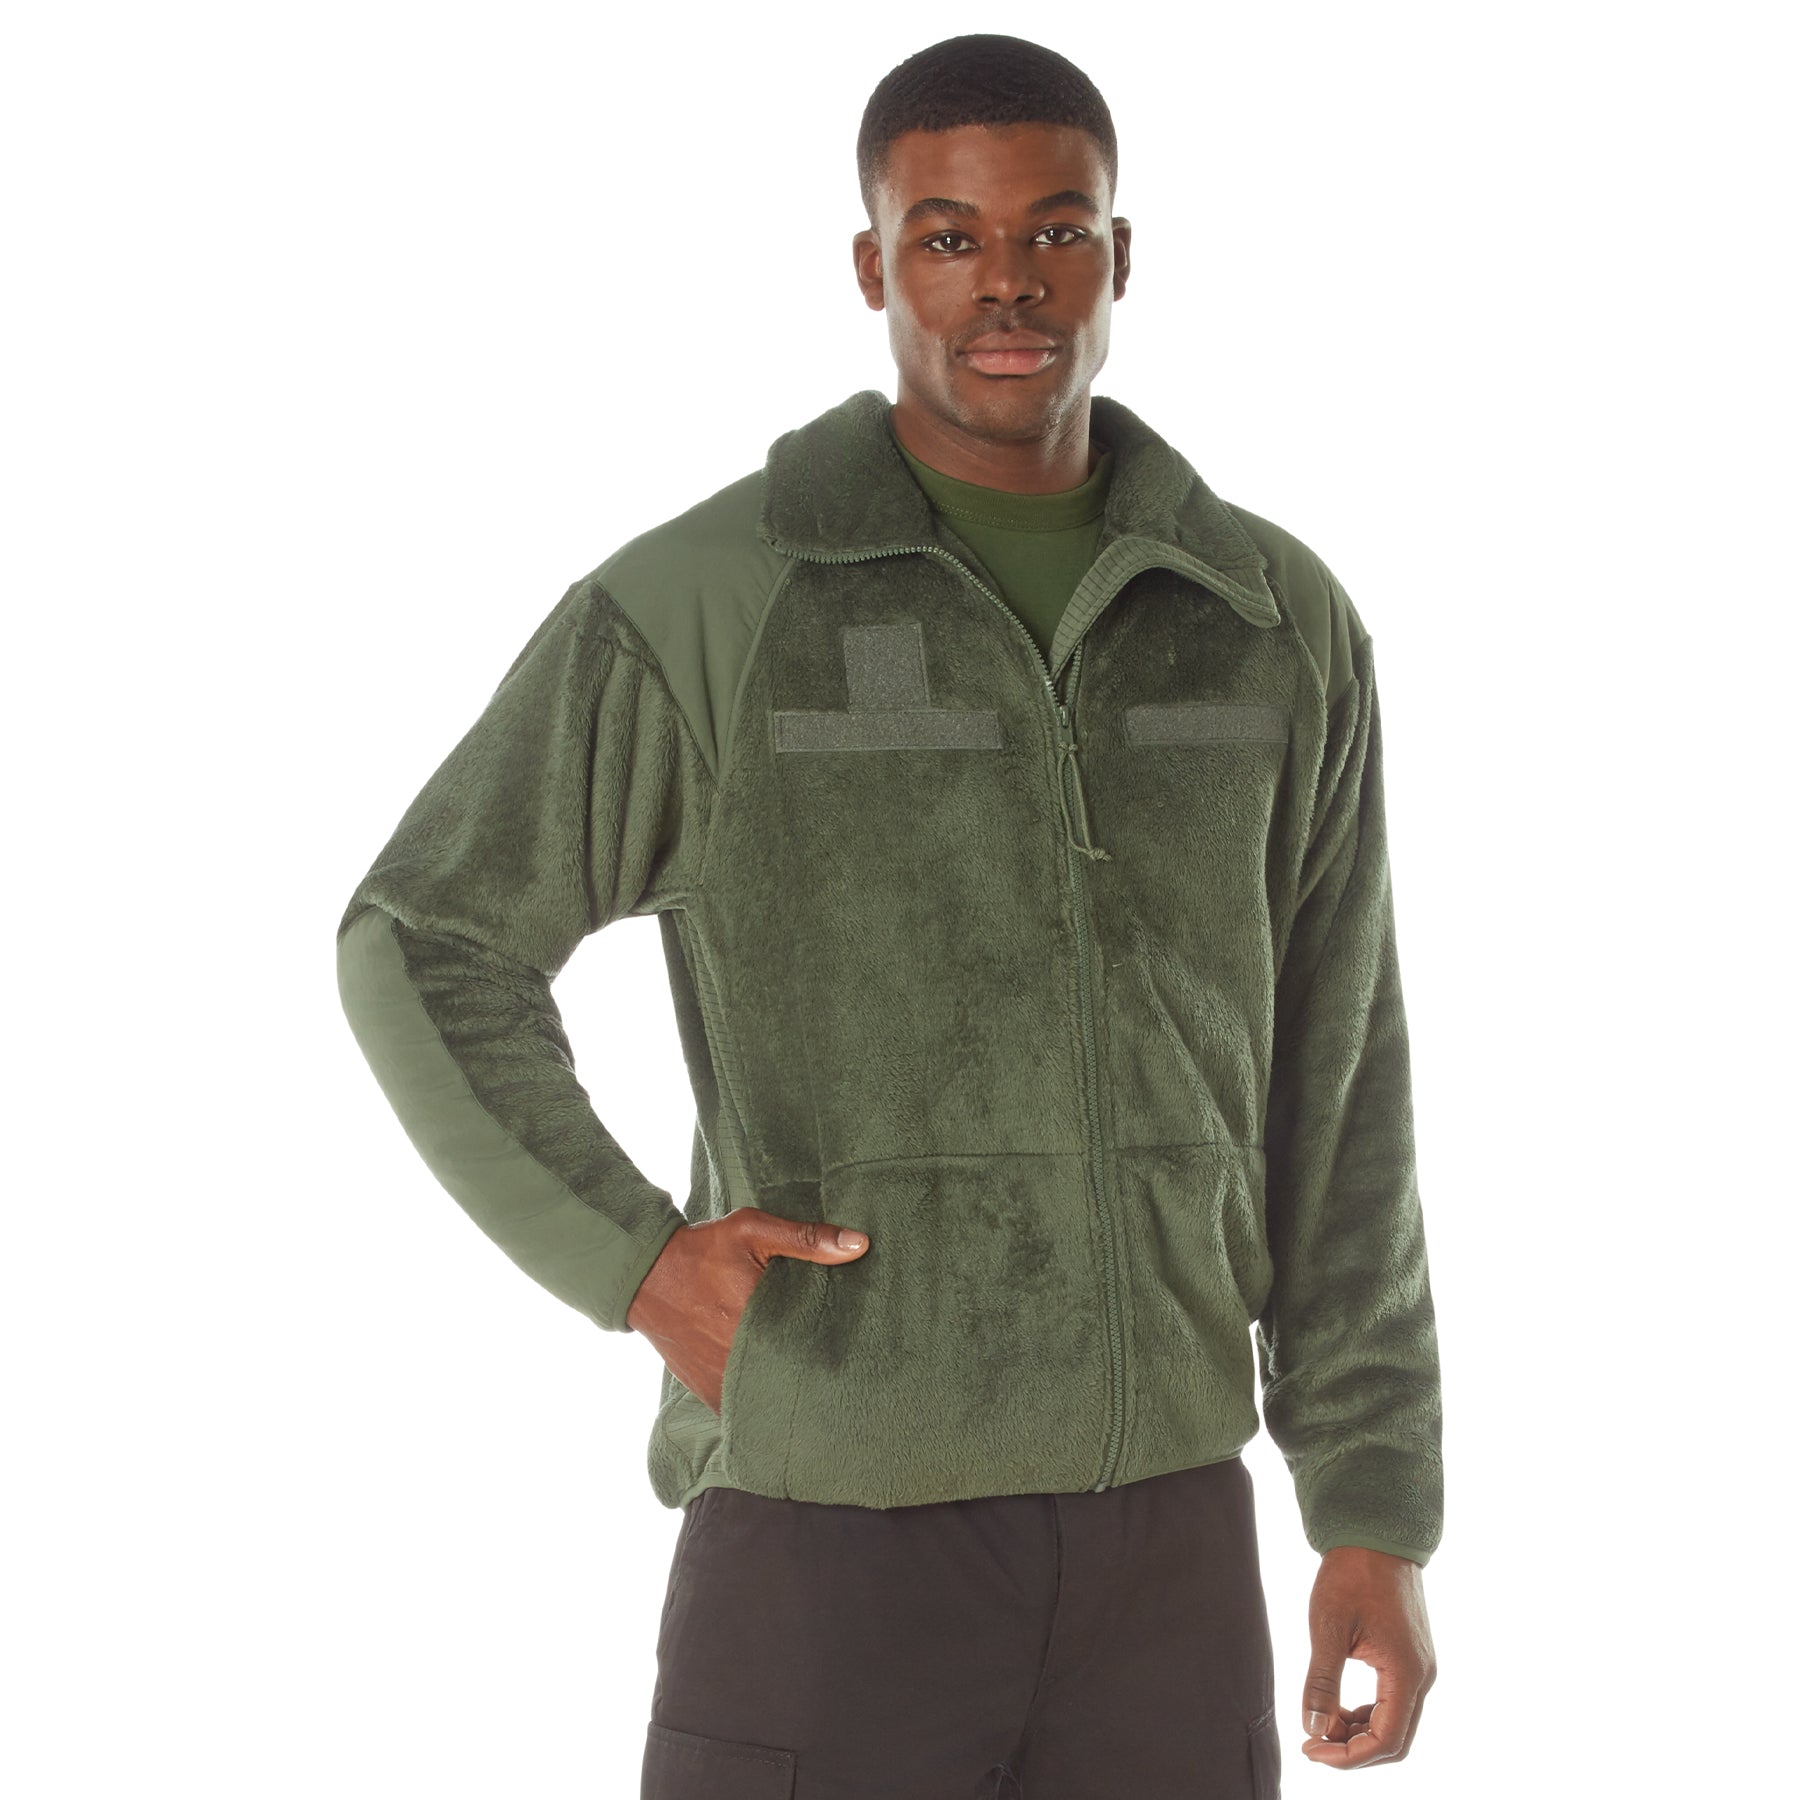 [AR 670-1][Military] Poly Gen 3 ECWCS Fleece Liner Jackets Olive Drab